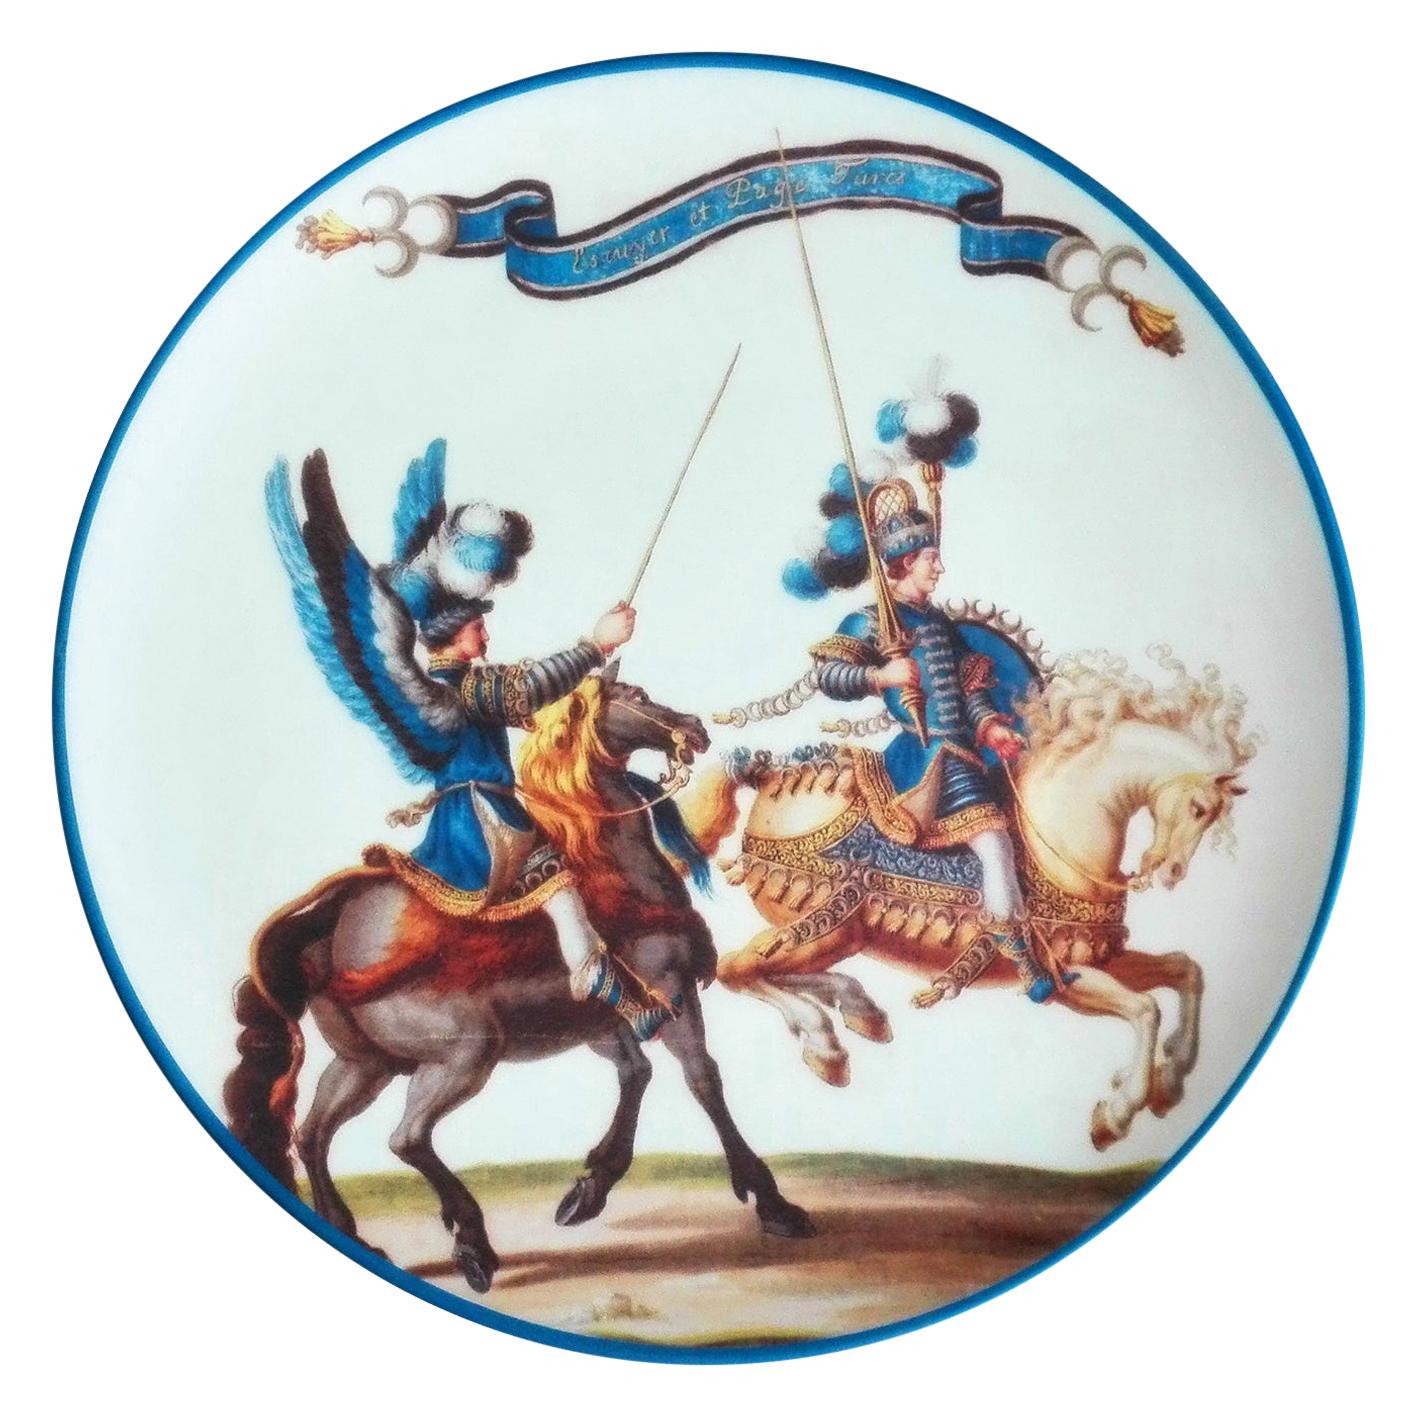 Le Carousel Porcelain Plate, Made in Italy